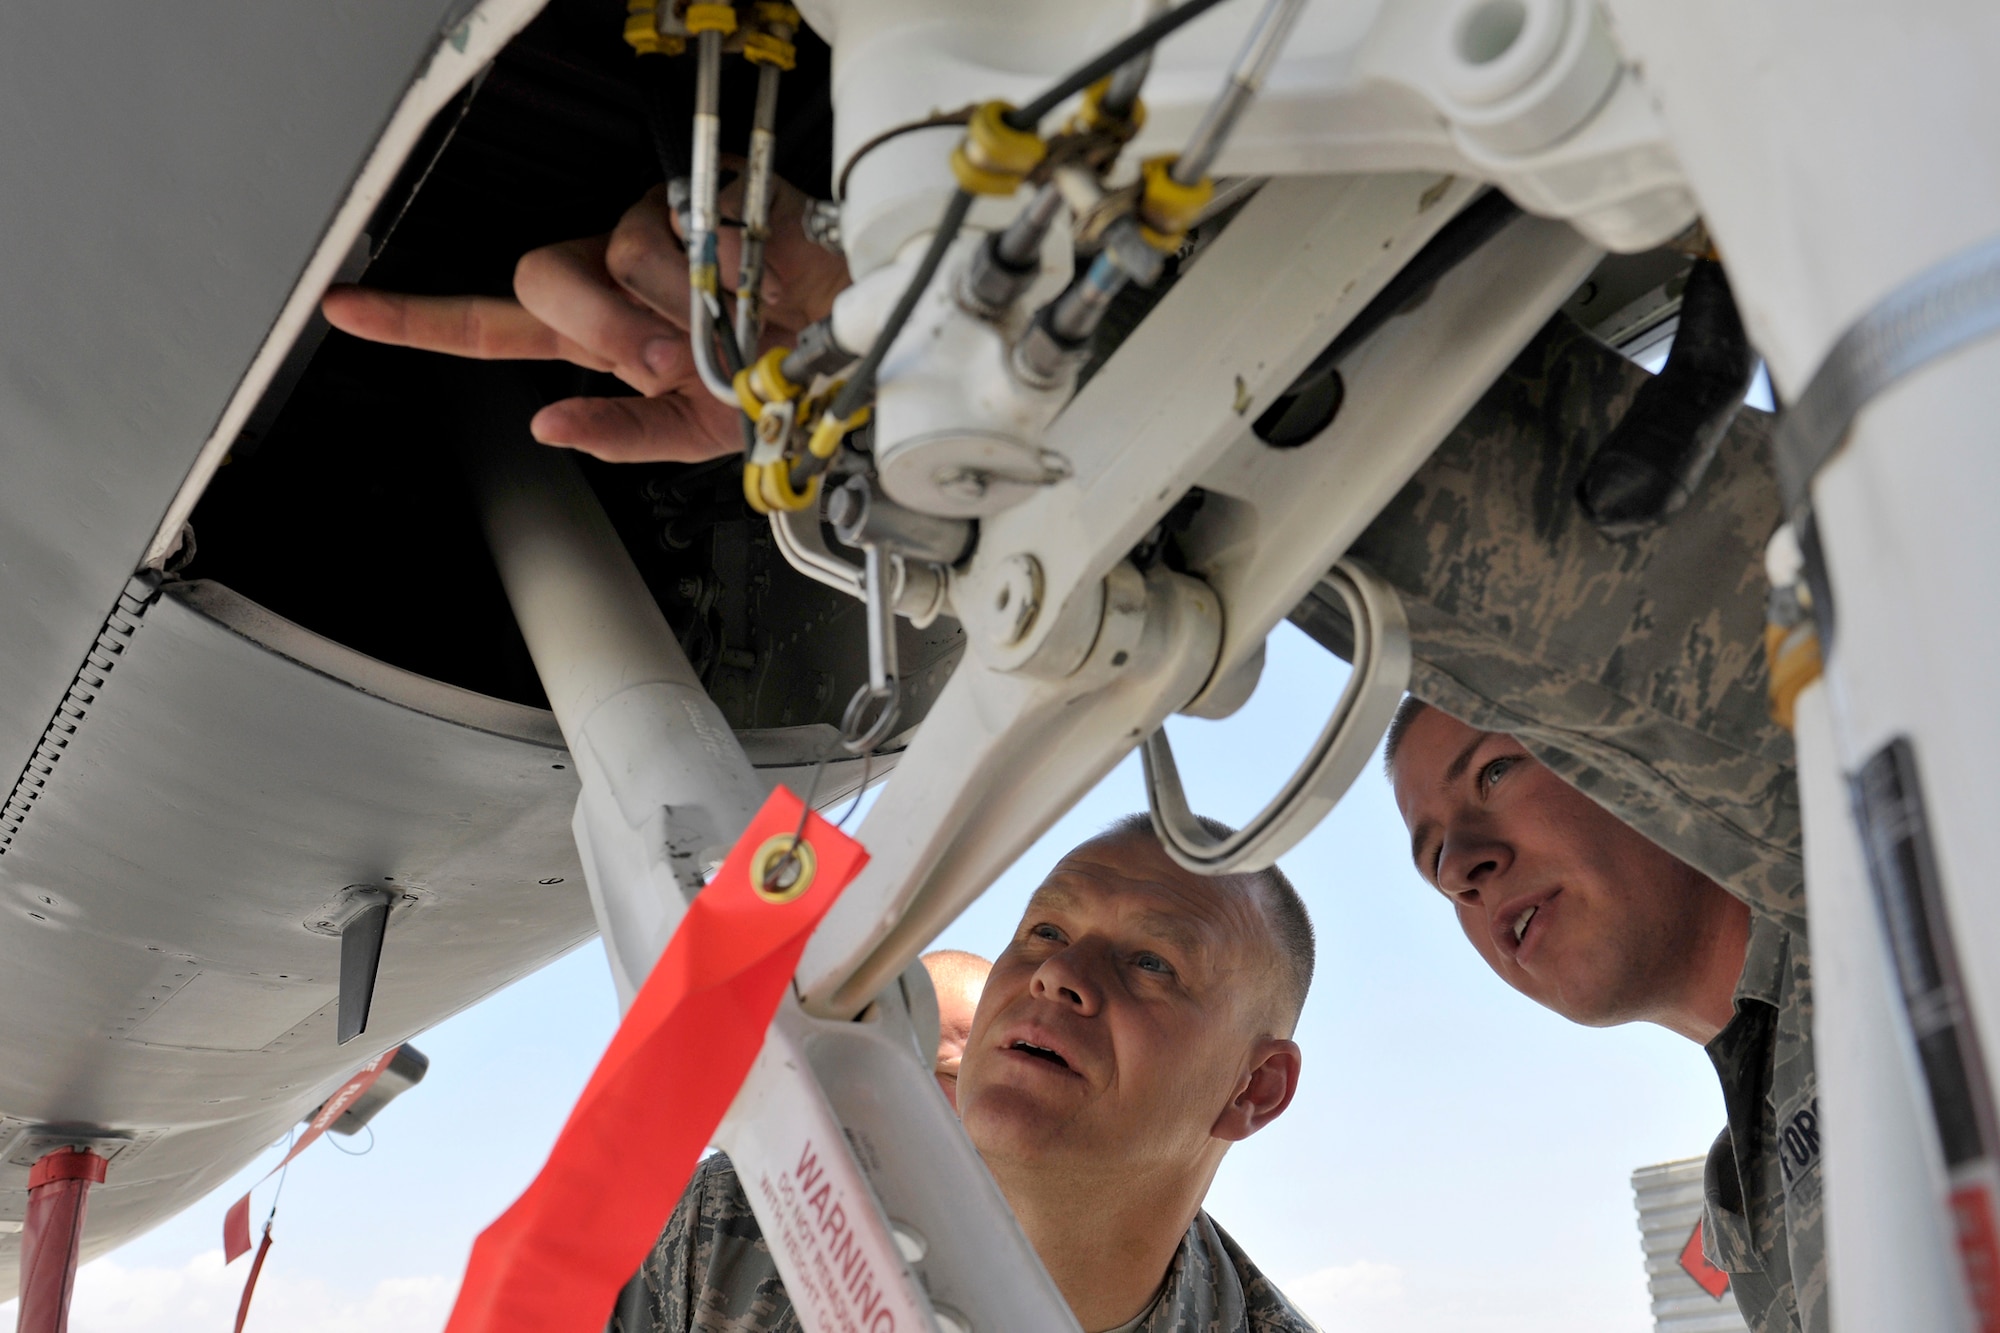 Chief Master Sergeant of the Air Force James A. Roy receives a tour of an F-15E Strike Eagle from Airman 1st Class Jordan Baker June 25, 2010, at Bagram Airfield, Afghanistan. Airman Baker is an F-15 crew chief assigned to the 455th Expeditionary Maintenance Group. (U.S. Air Force Photo/Staff Sgt. Christopher Boitz)